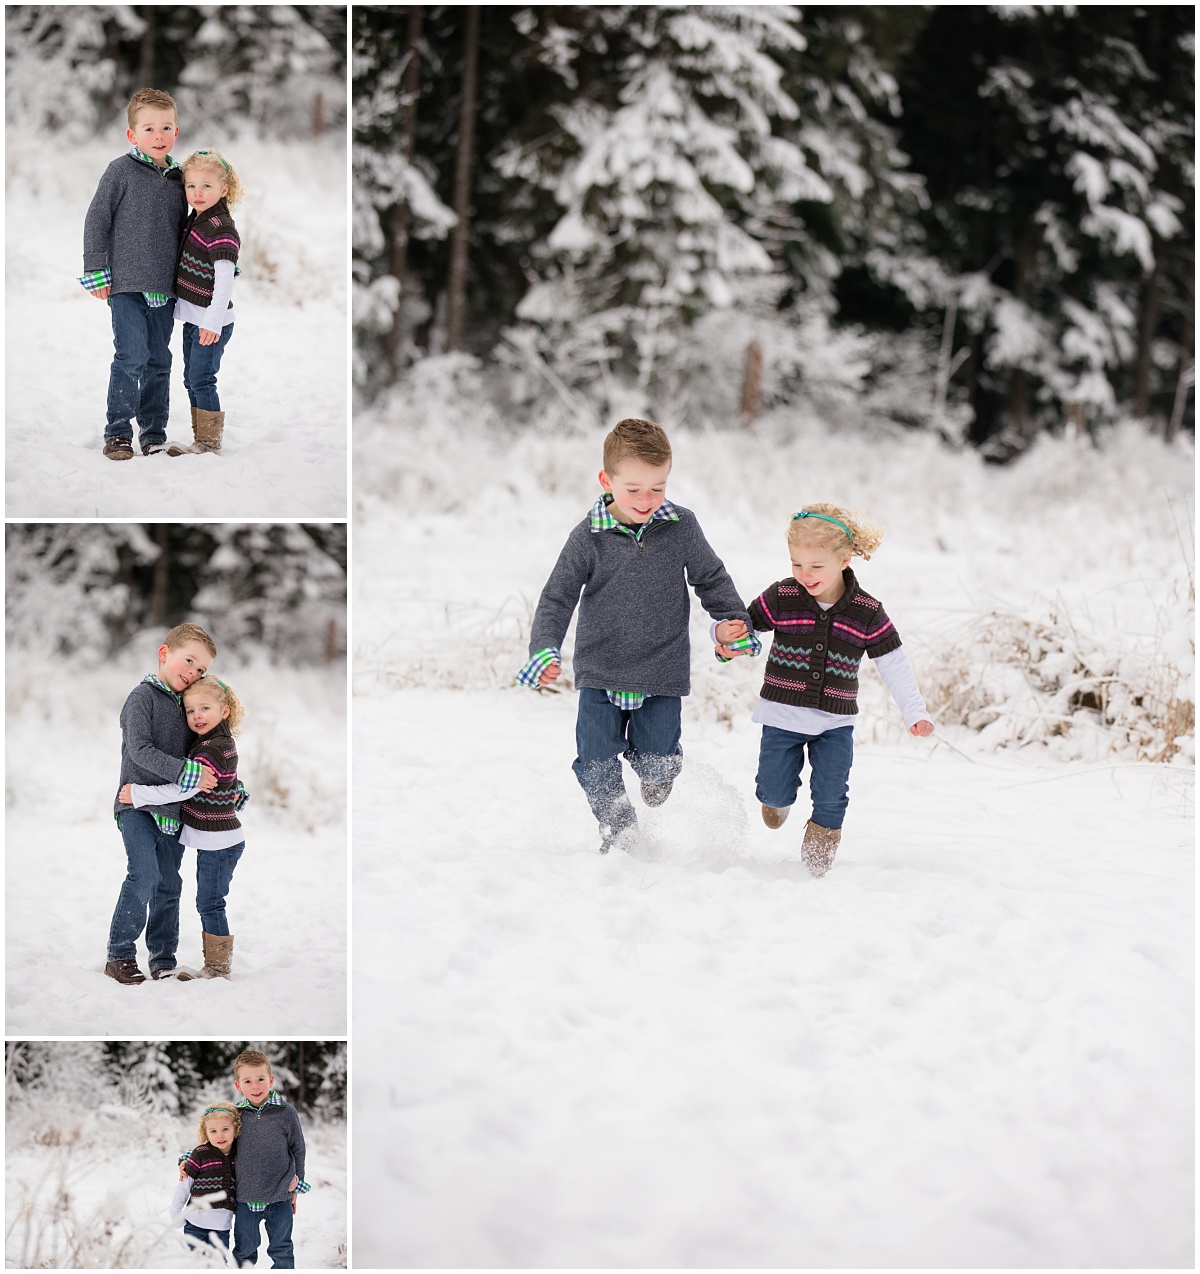 Amazing Day Photography - Winter Family Session - Derby Reach Park - Langley Family Photographer (11).jpg